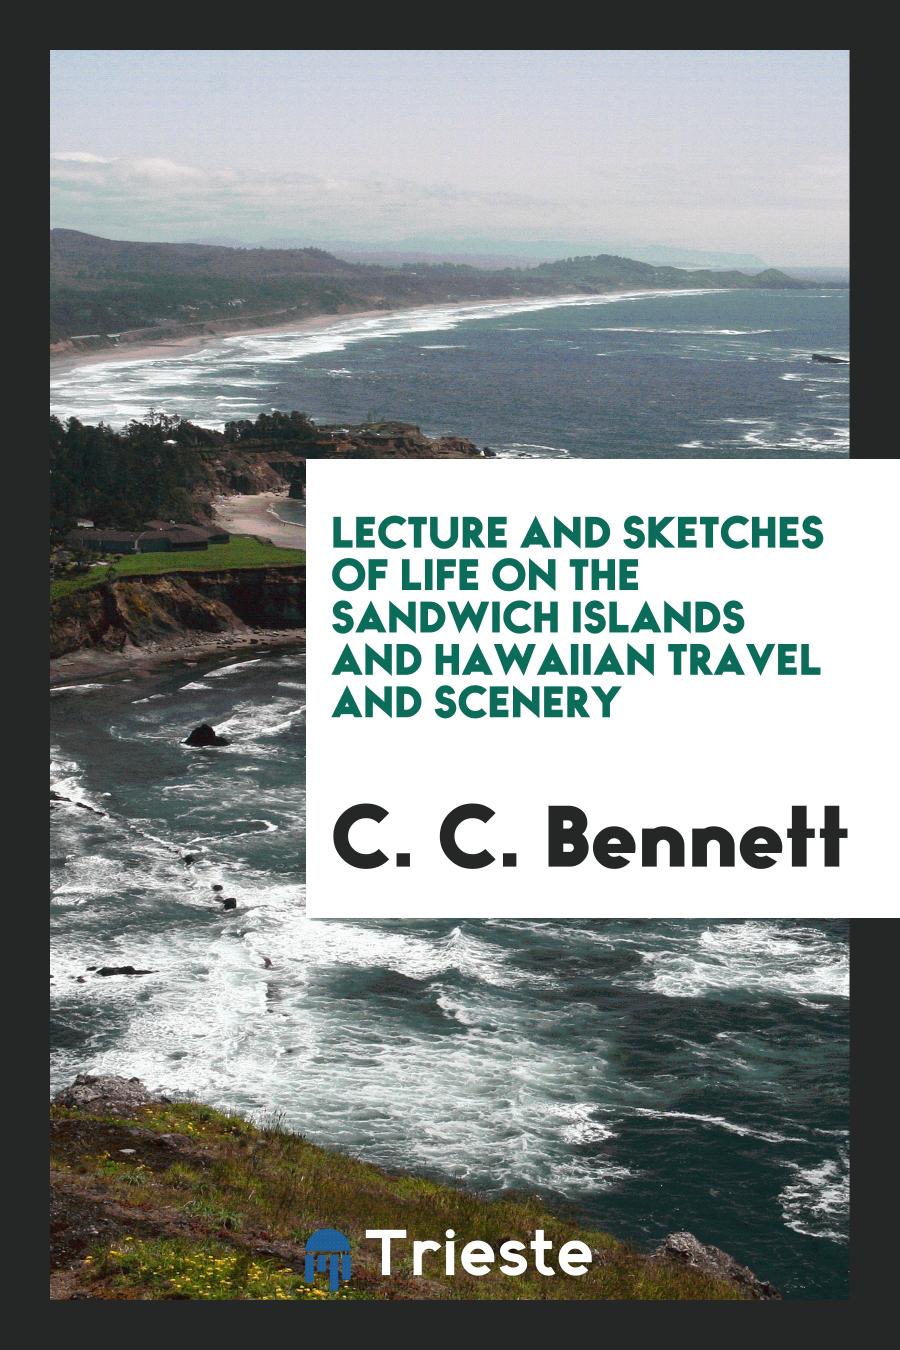 Lecture and Sketches of Life on the Sandwich Islands and Hawaiian Travel and Scenery